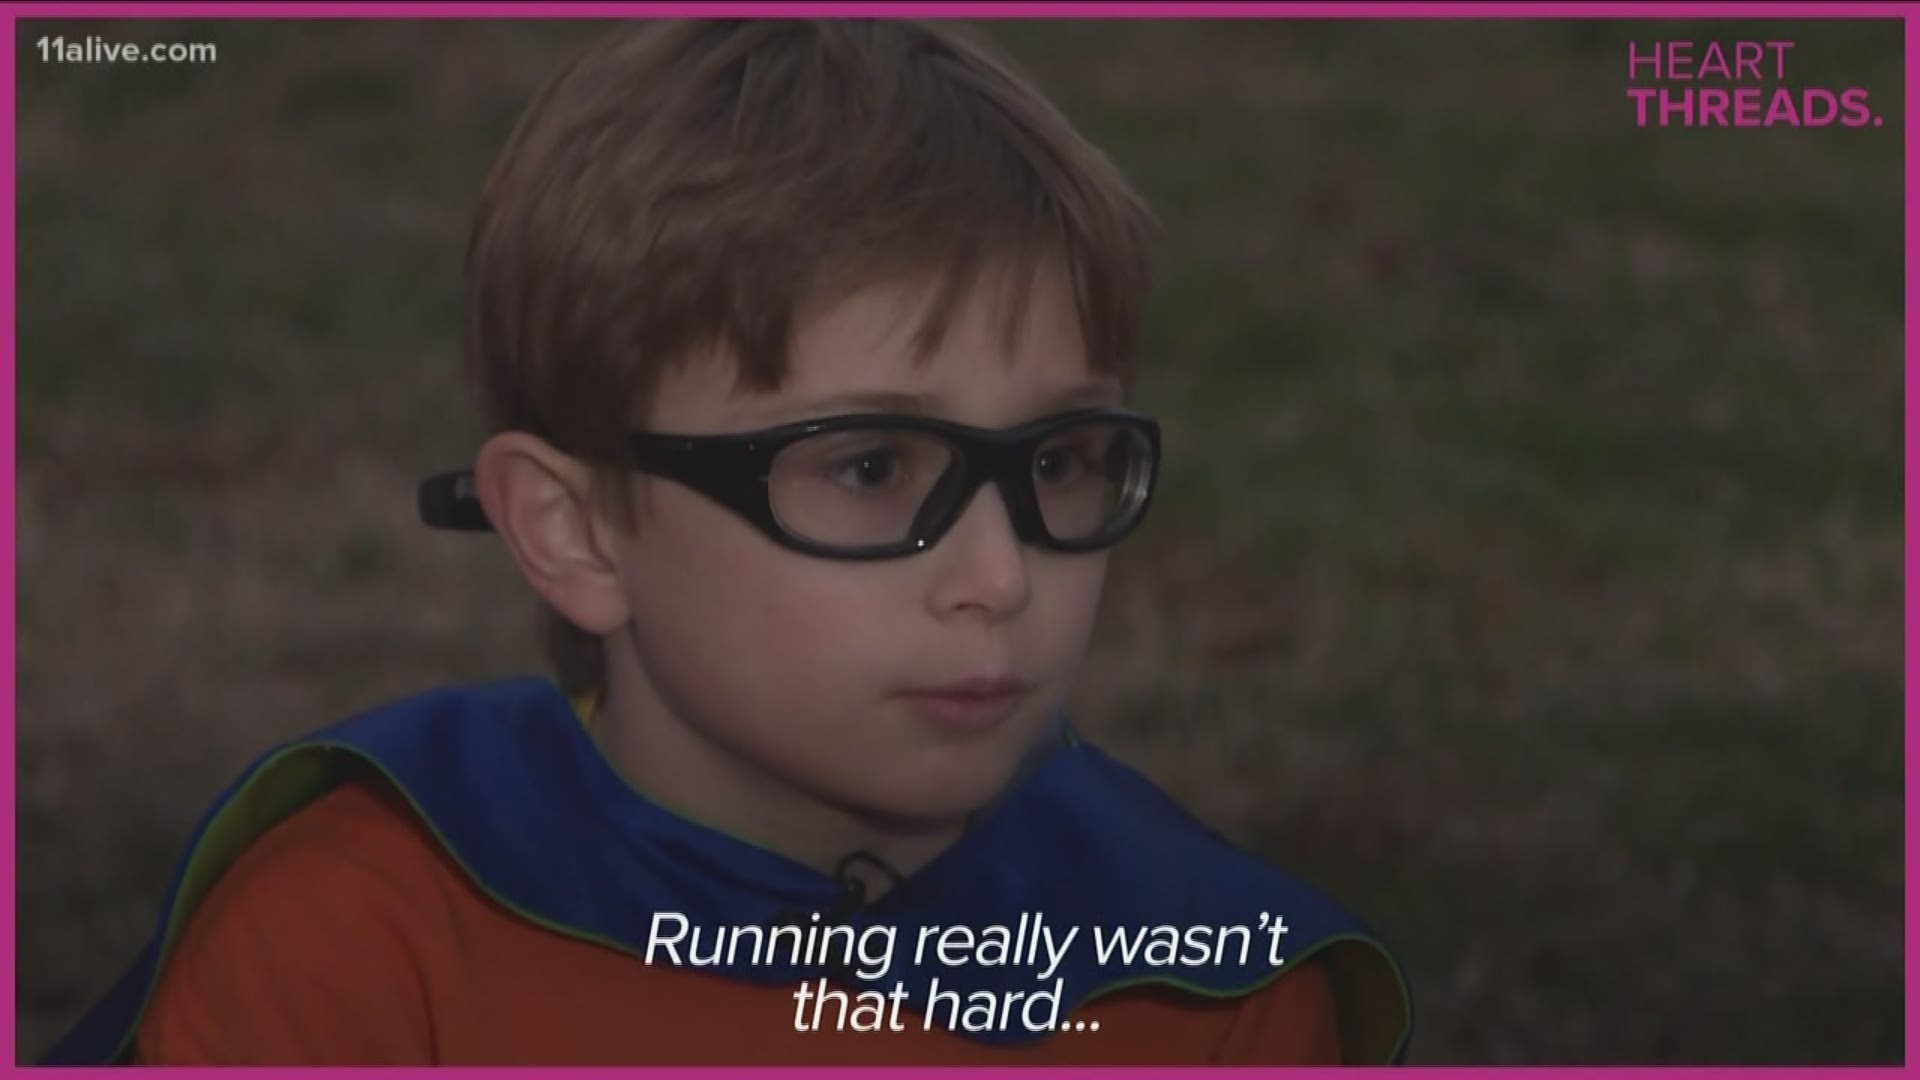 He ran in 5ks  and 10ks and has ran more than $60,000 for kids with cancer.